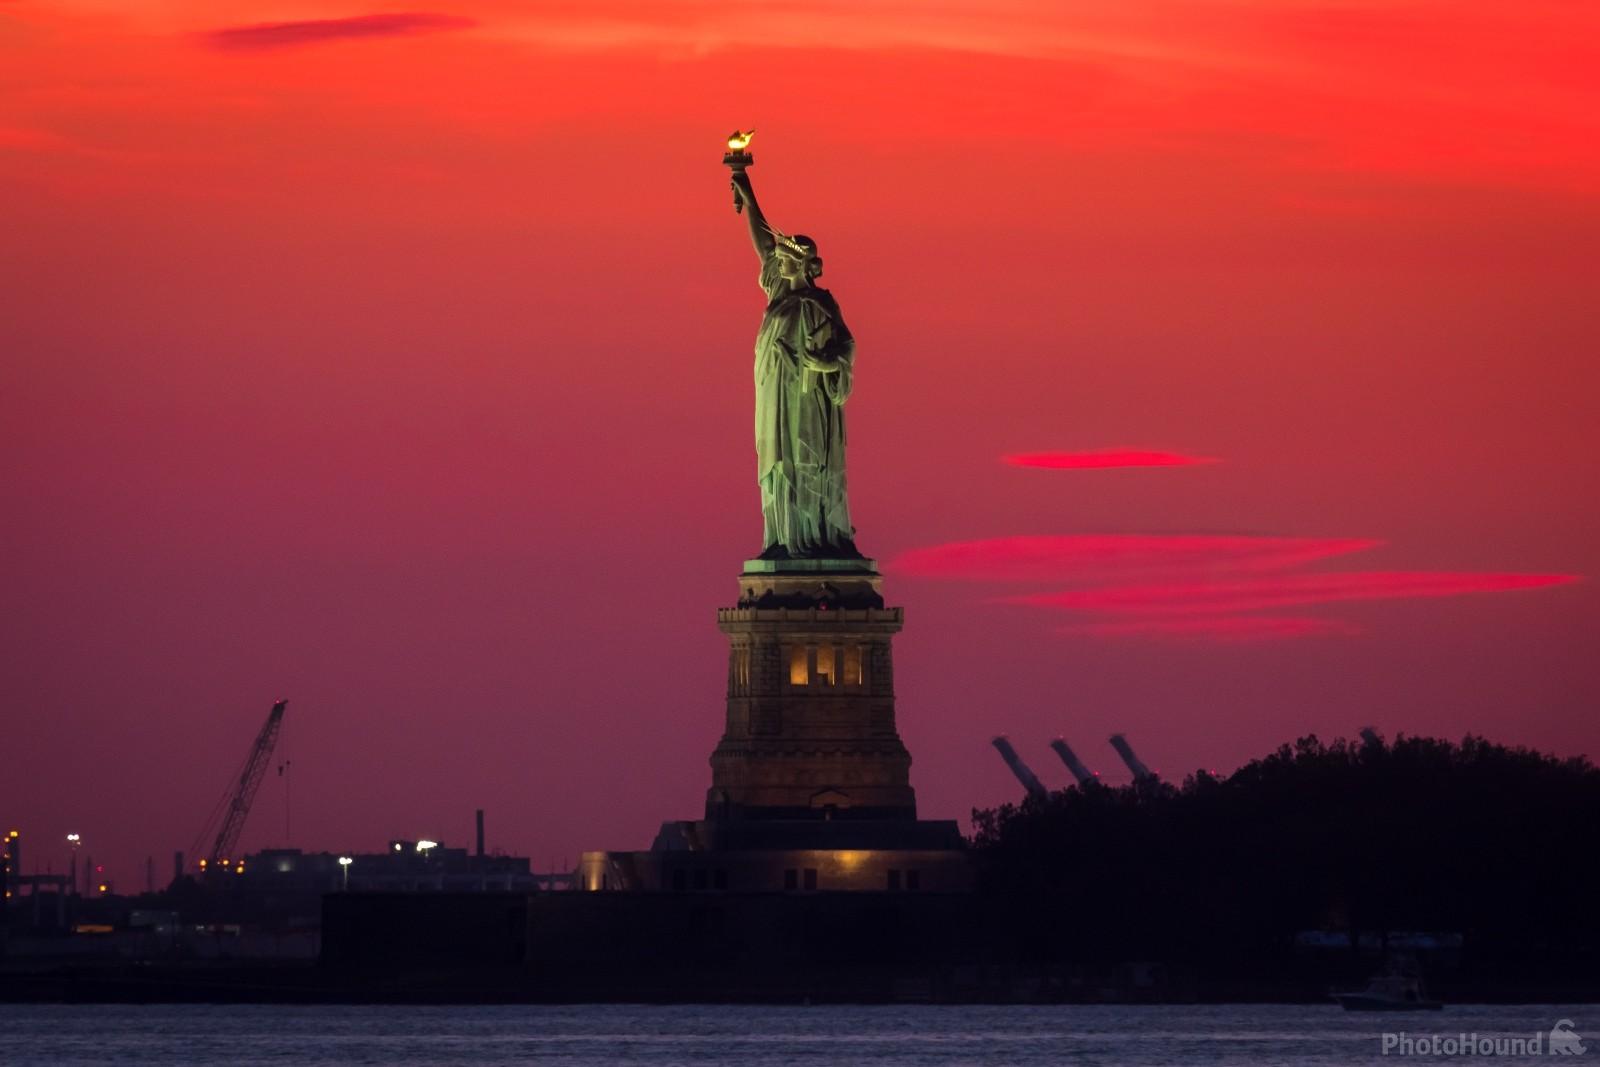 Image of Statue of Liberty from the Brooklyn Bridge Park by VOJTa Herout